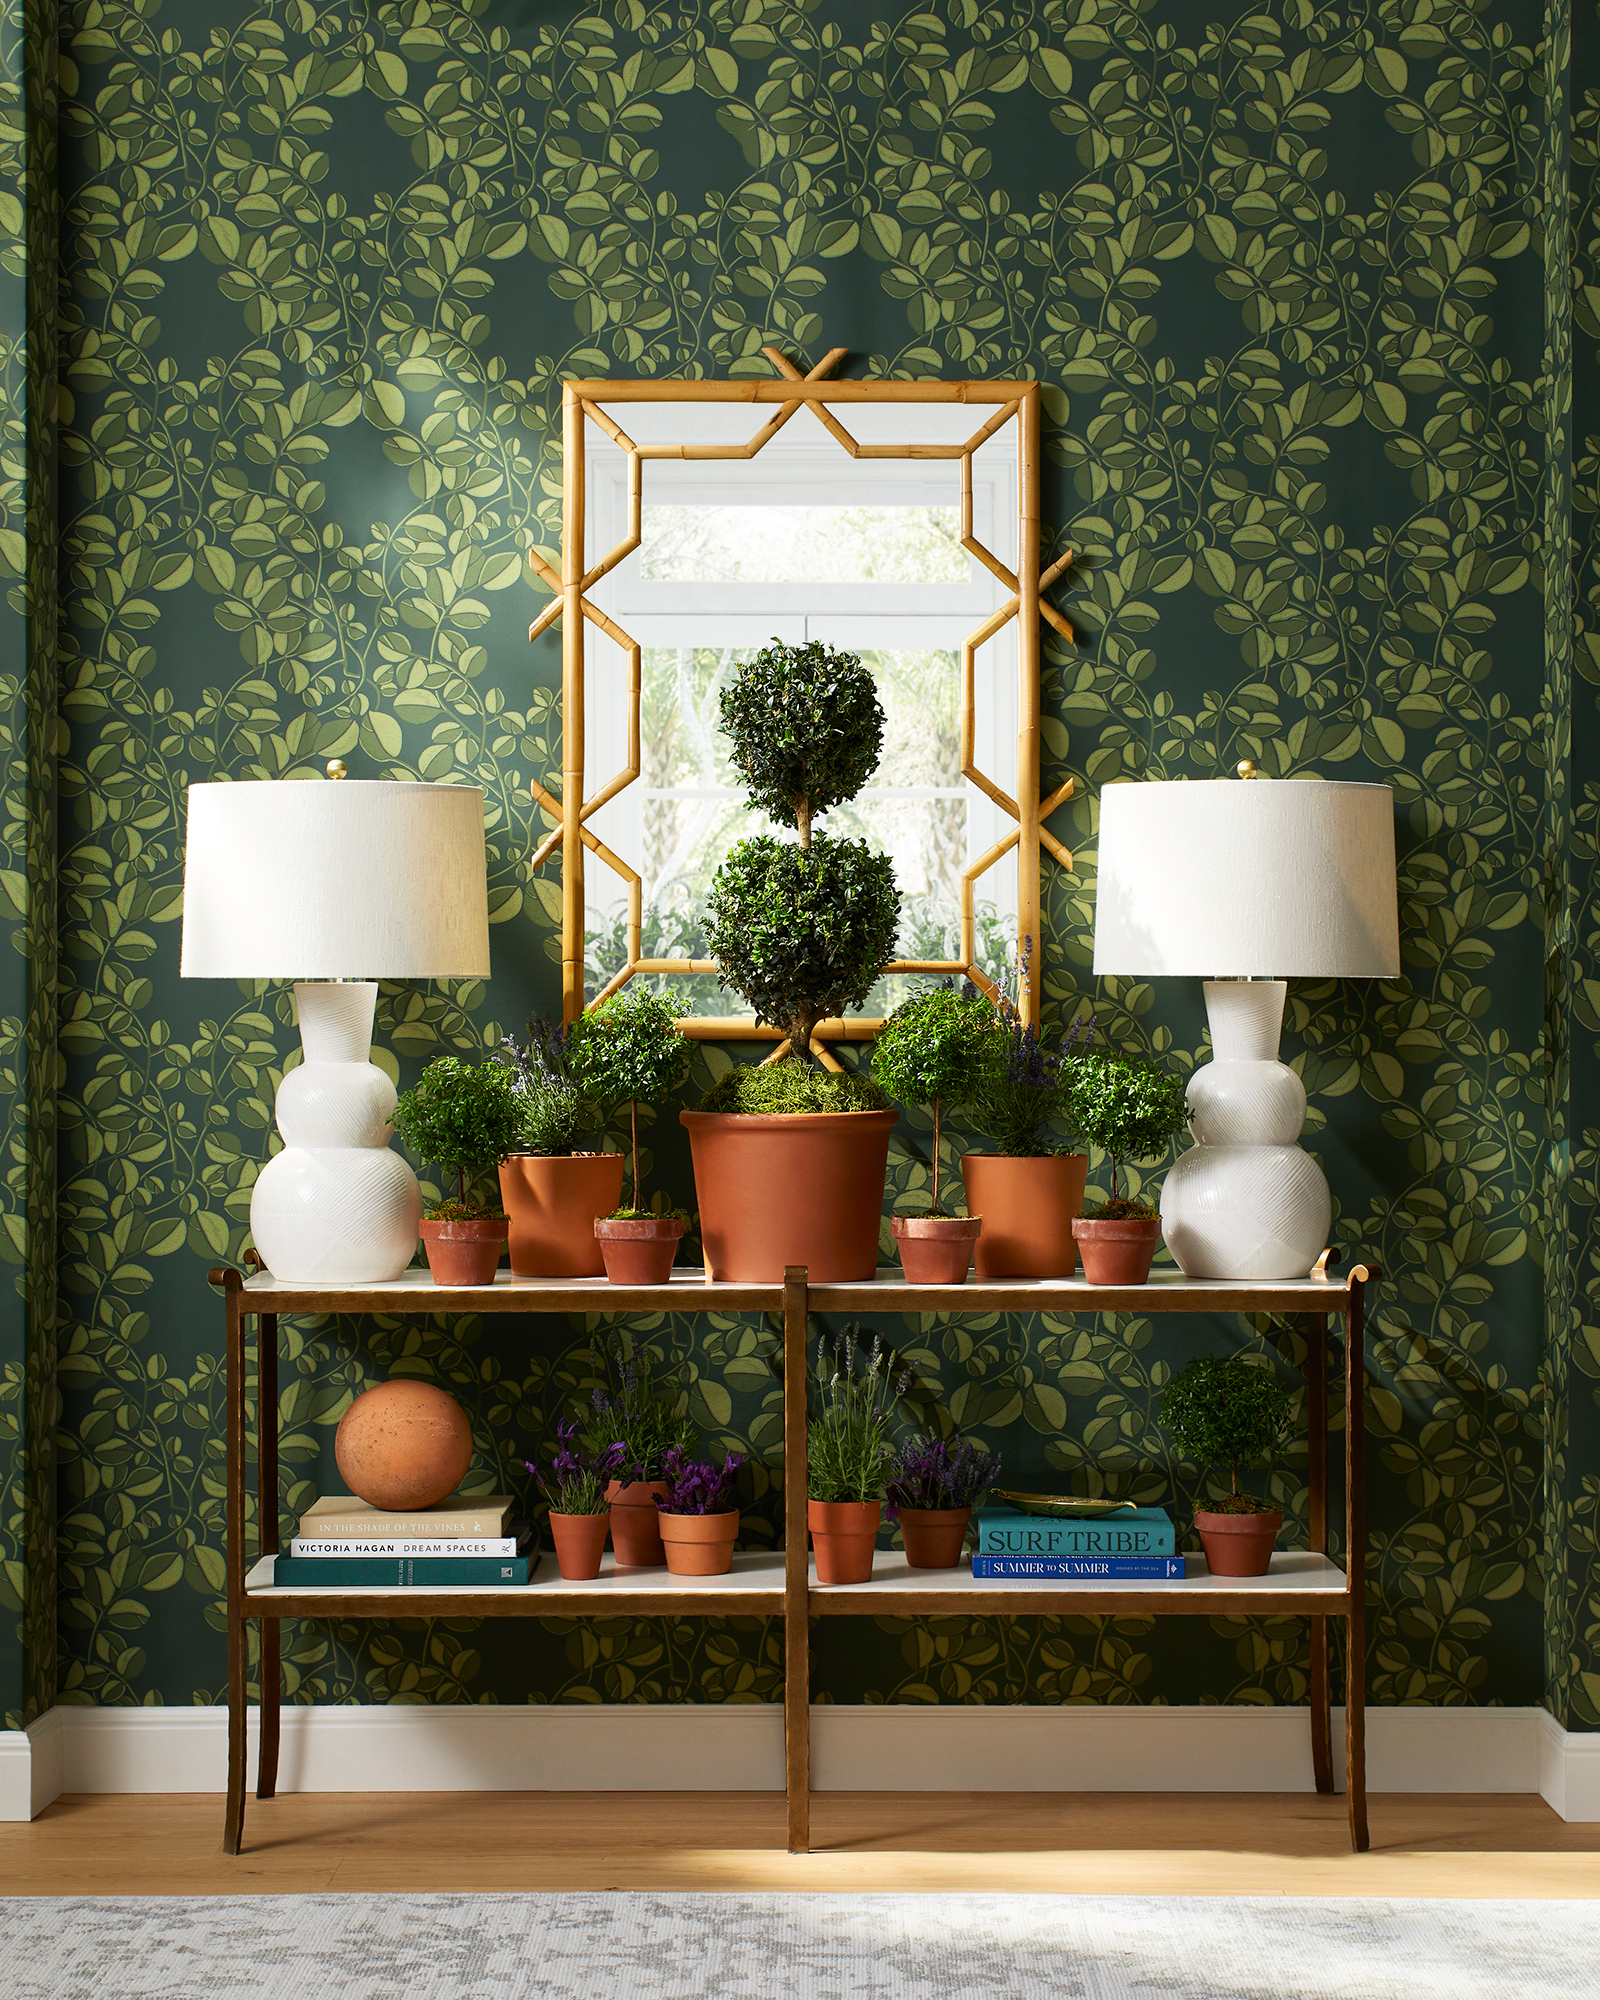 Love this beautiful sage green wallpaper for fall, along with the console table, lamps and potted topiaries create a beautiful fall scene #falldecor #wallpaperideas #floralwallpaper #serenaandlily